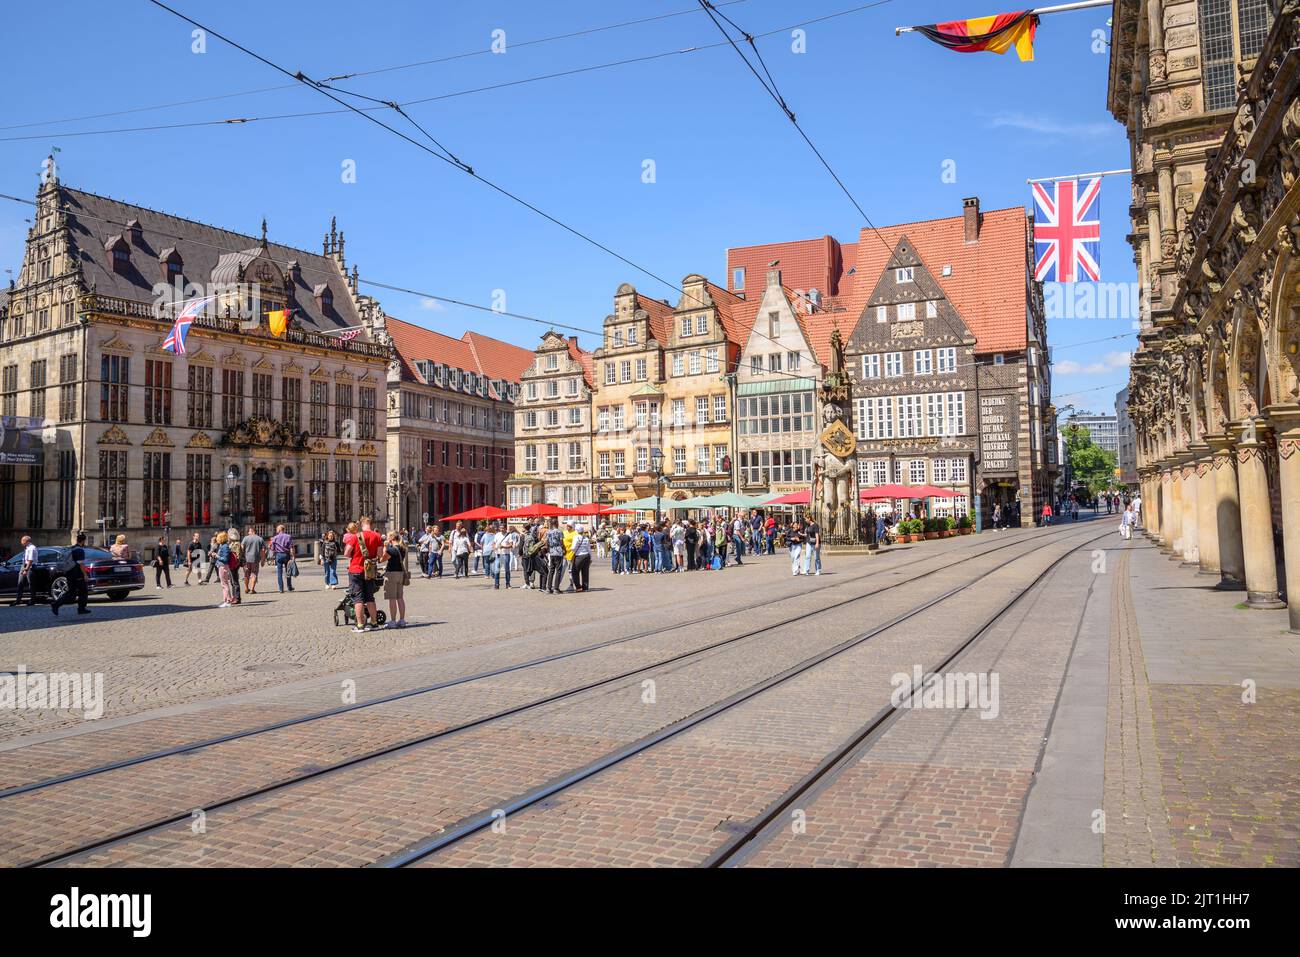 Bremen, Germany - June 21, 2022: View of Market Square crowded with locals and tourists on a sunny morning. Market square is a beautiful historic mark Stock Photo